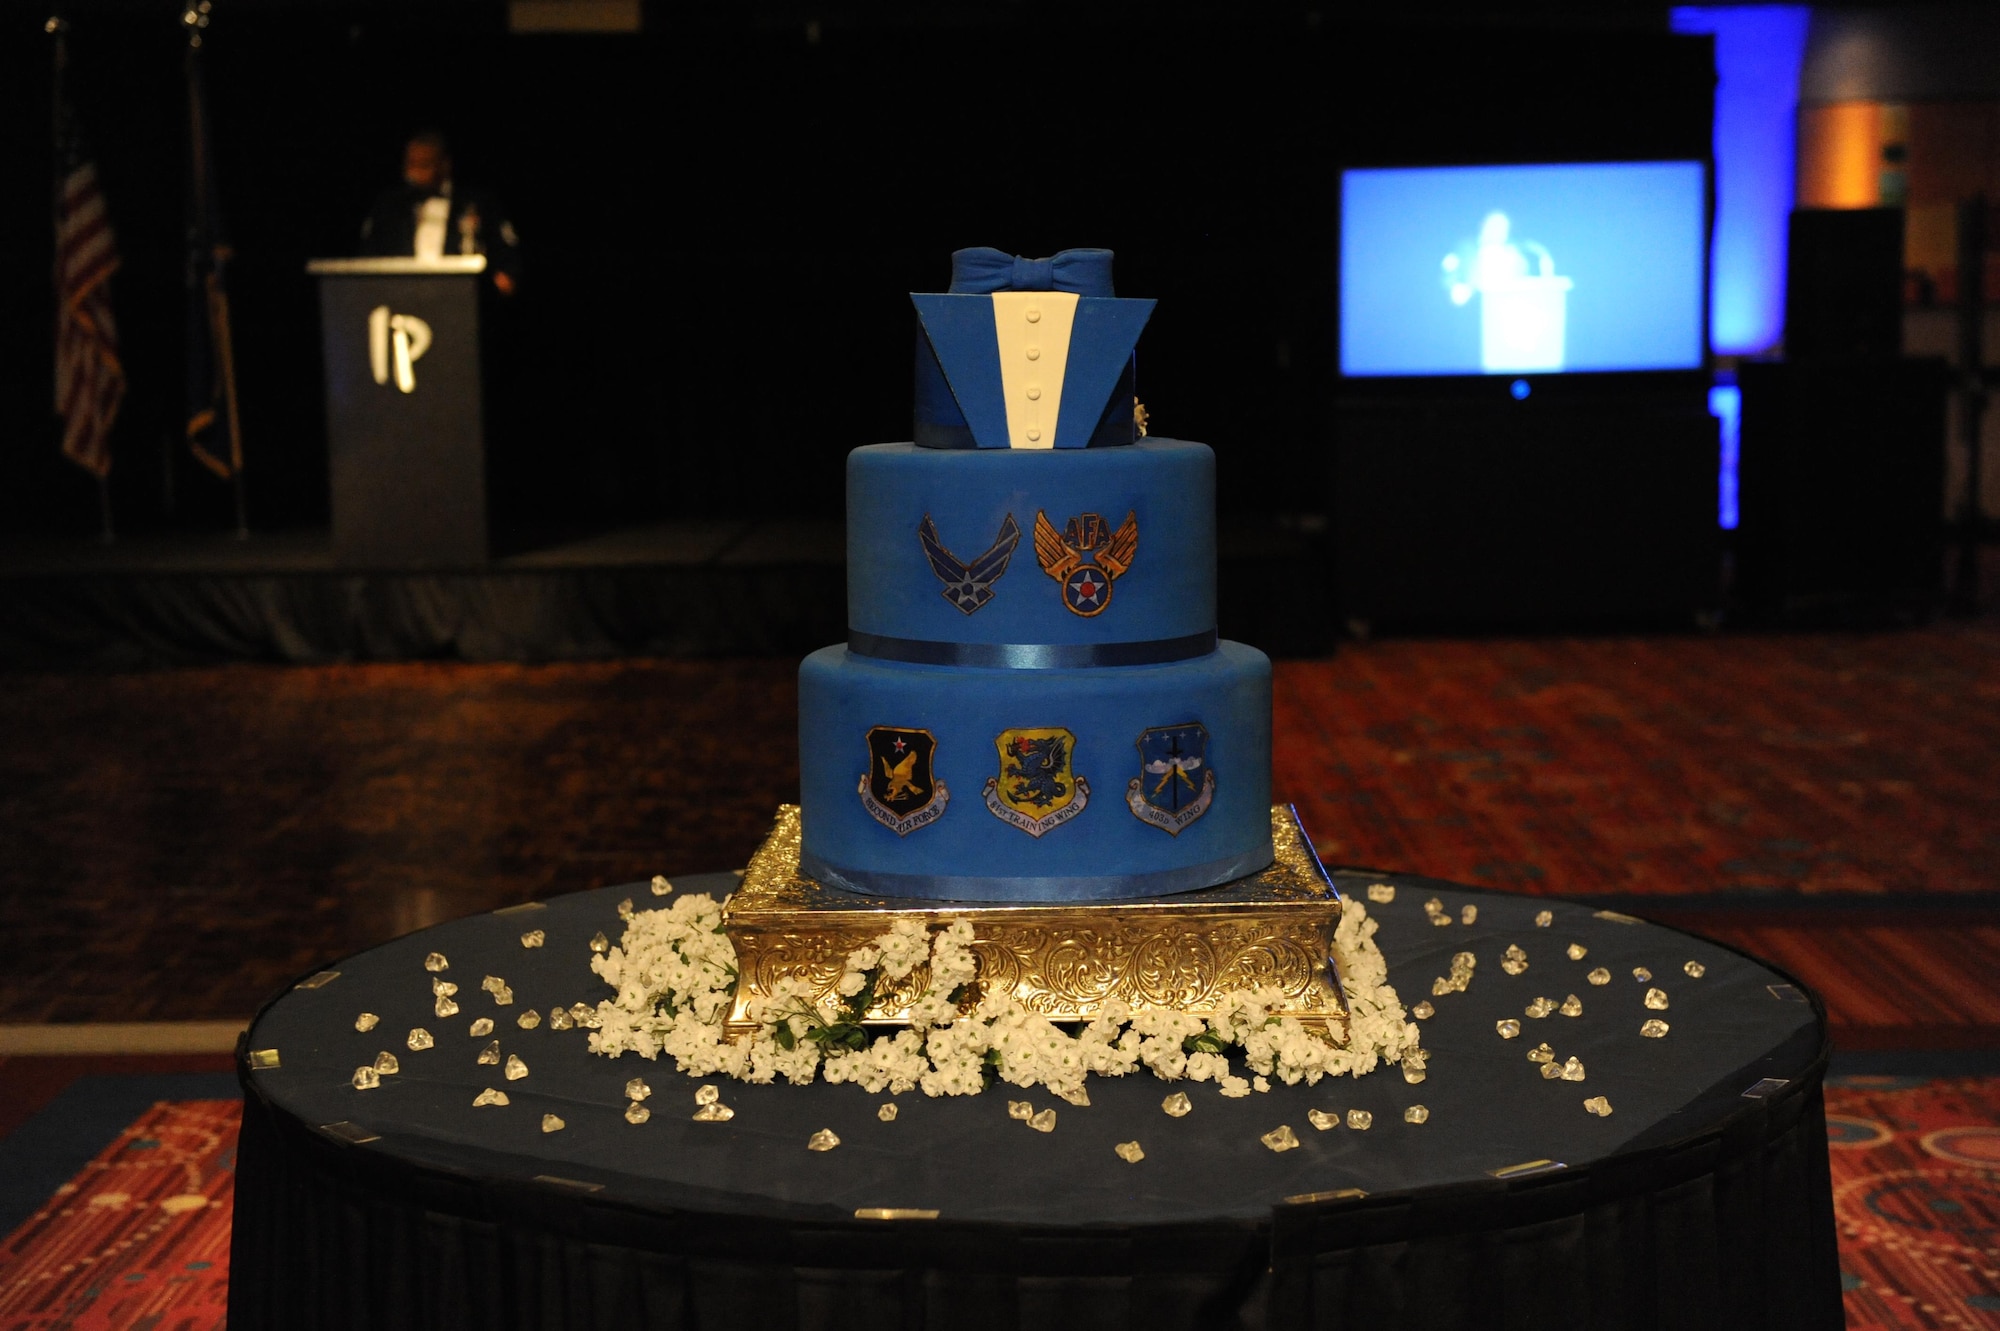 A birthday cake sits on display during the Keesler Air Force Ball at the Imperial Palace Casino Sept. 24, 2016, Biloxi, Miss. The event was sponsored by the Air Force Association John C. Stennis Chapter #332 to celebrate the Air Force’s 69th birthday and the base’s 75th anniversary. (U.S. Air Force photo by Kemberly Groue/Released)